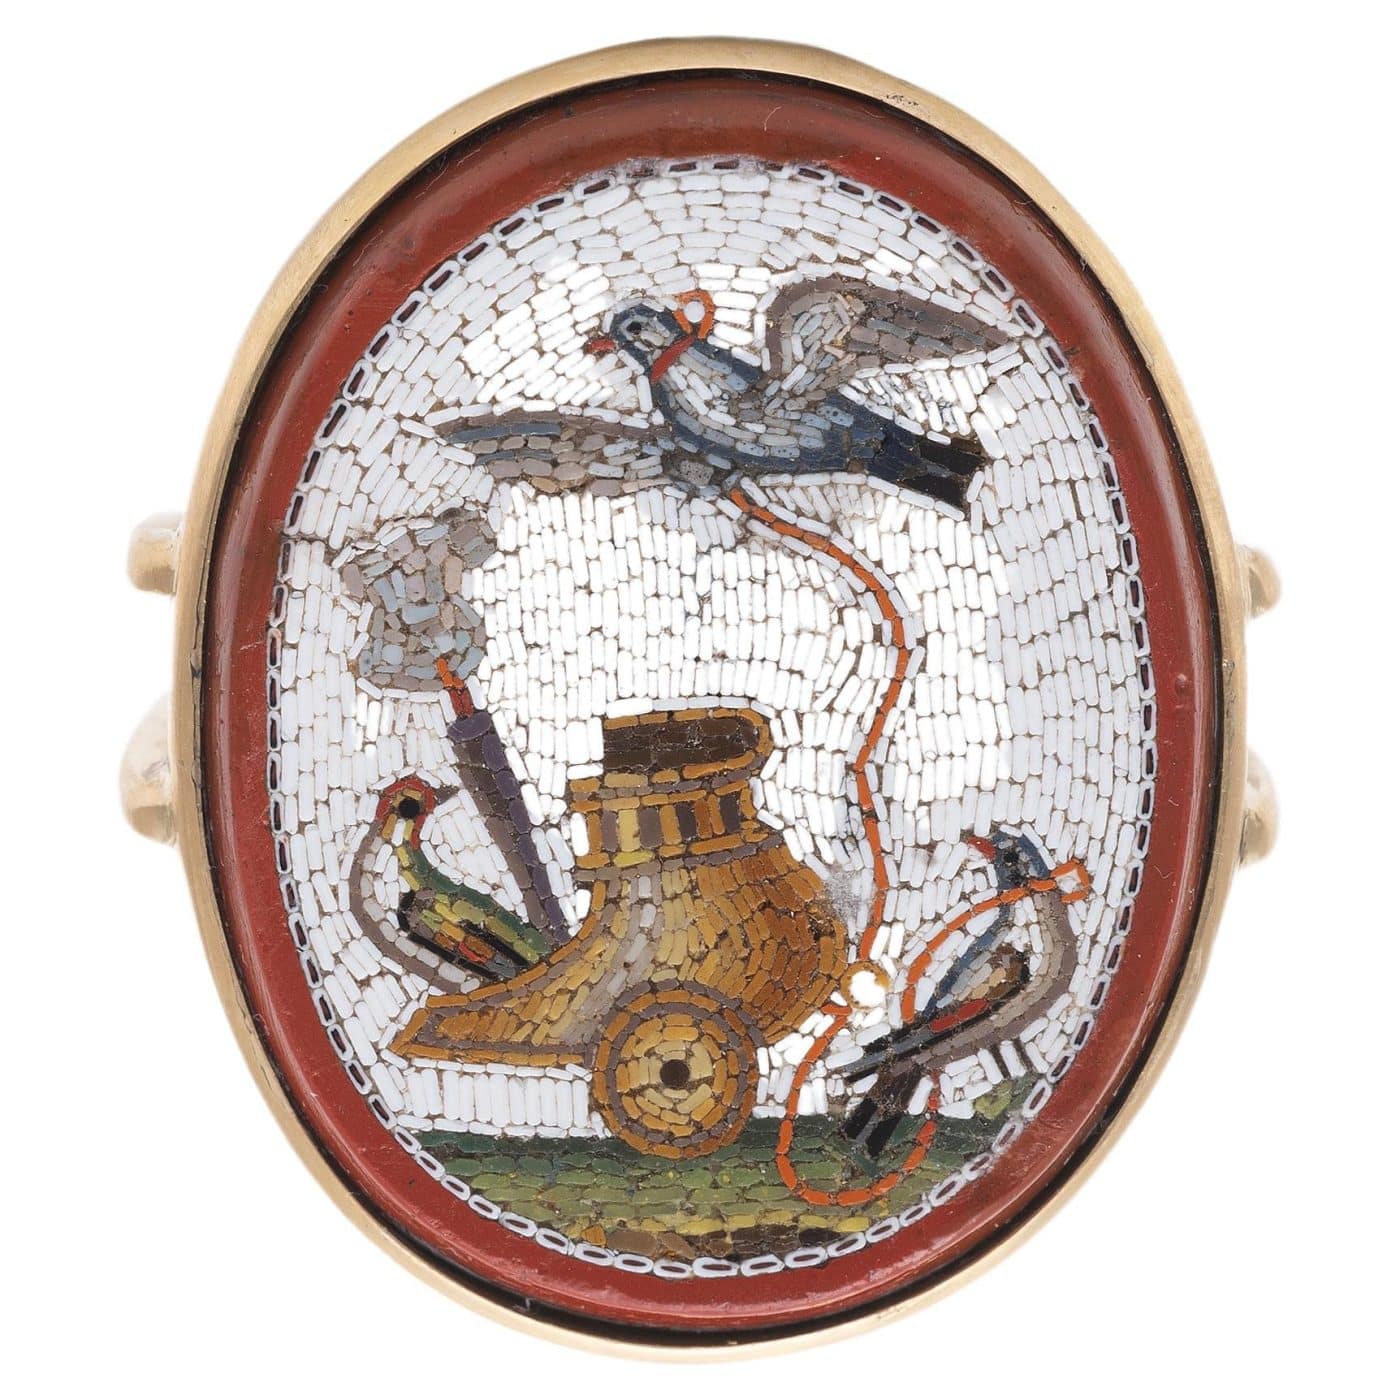 19th-century MICROMOSAIC RING  depicting three birds with a chariot